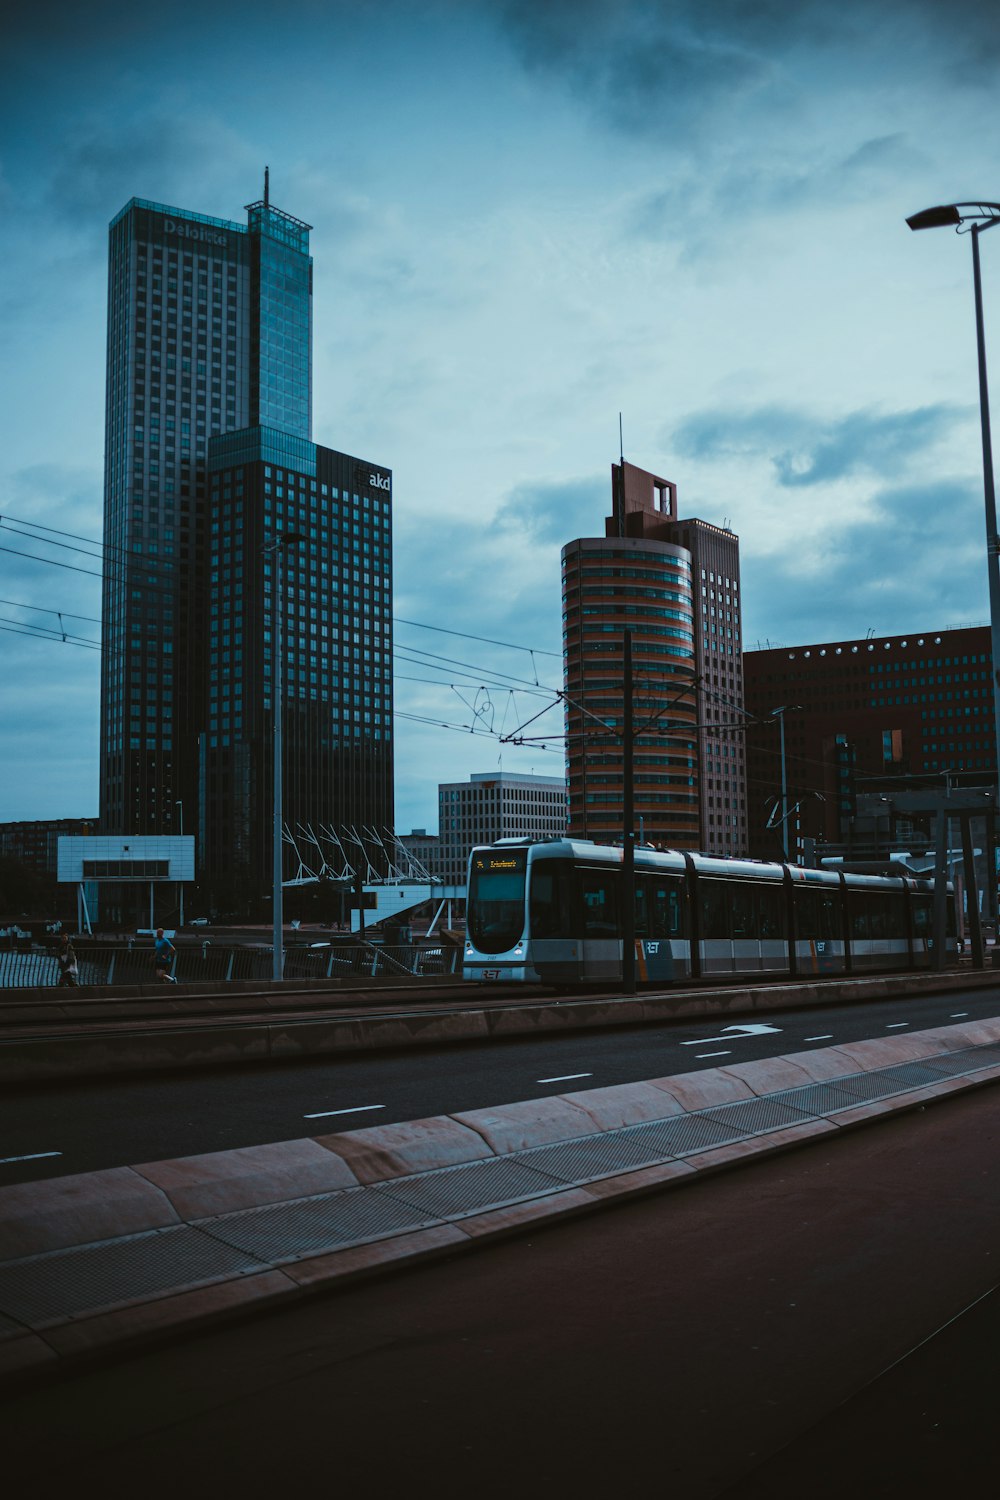 a train on a track in front of some tall buildings